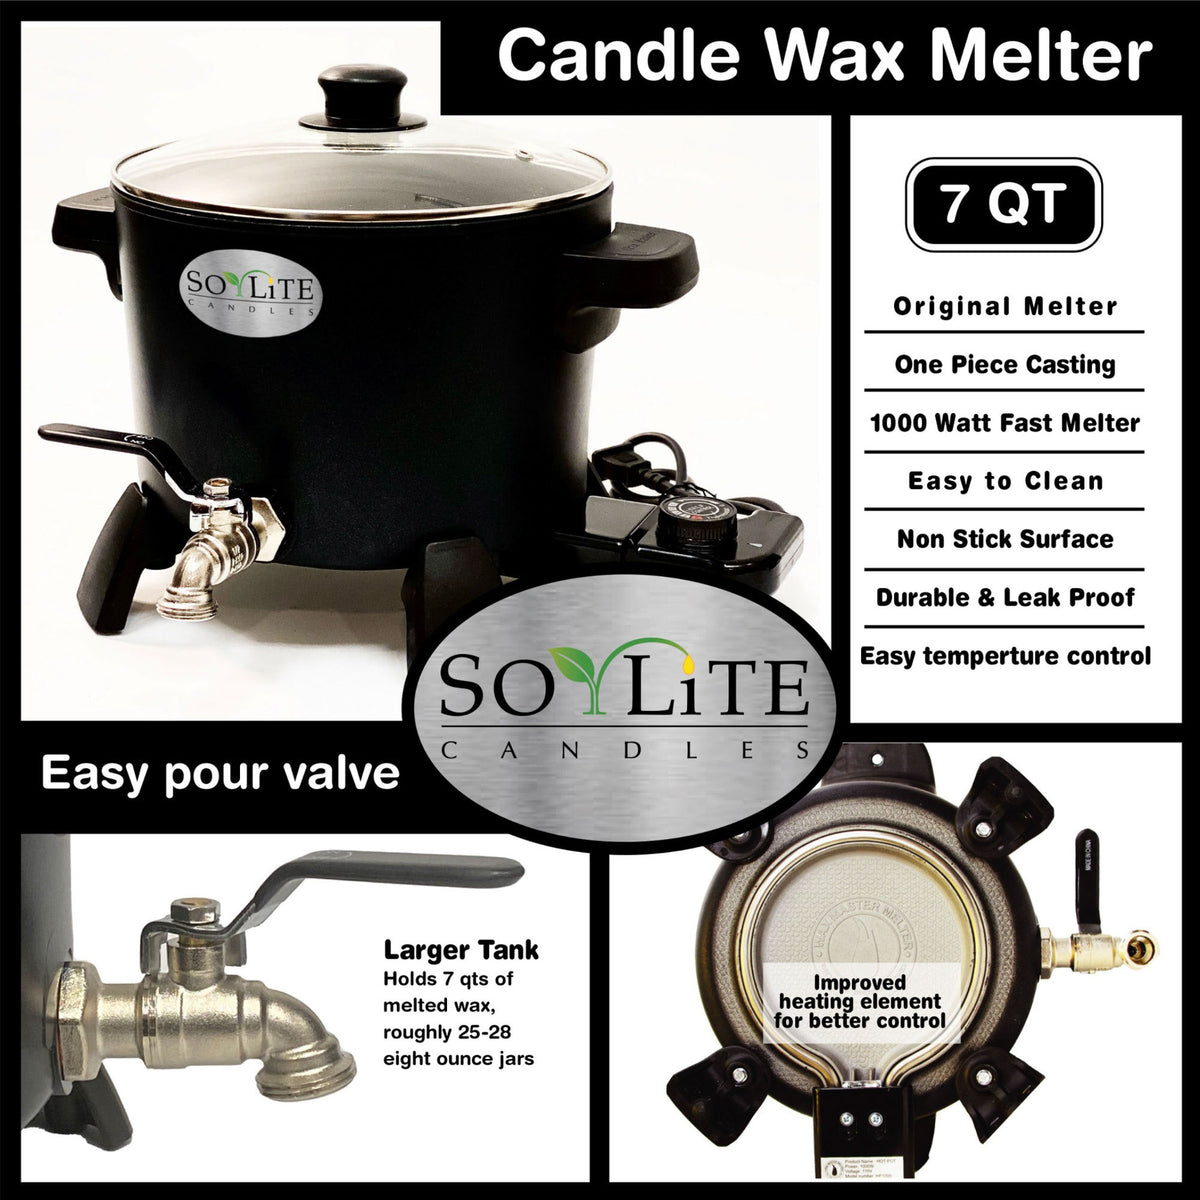 New 220 Volt Power. Wax Melter For Candle Making, This Wax Warmer